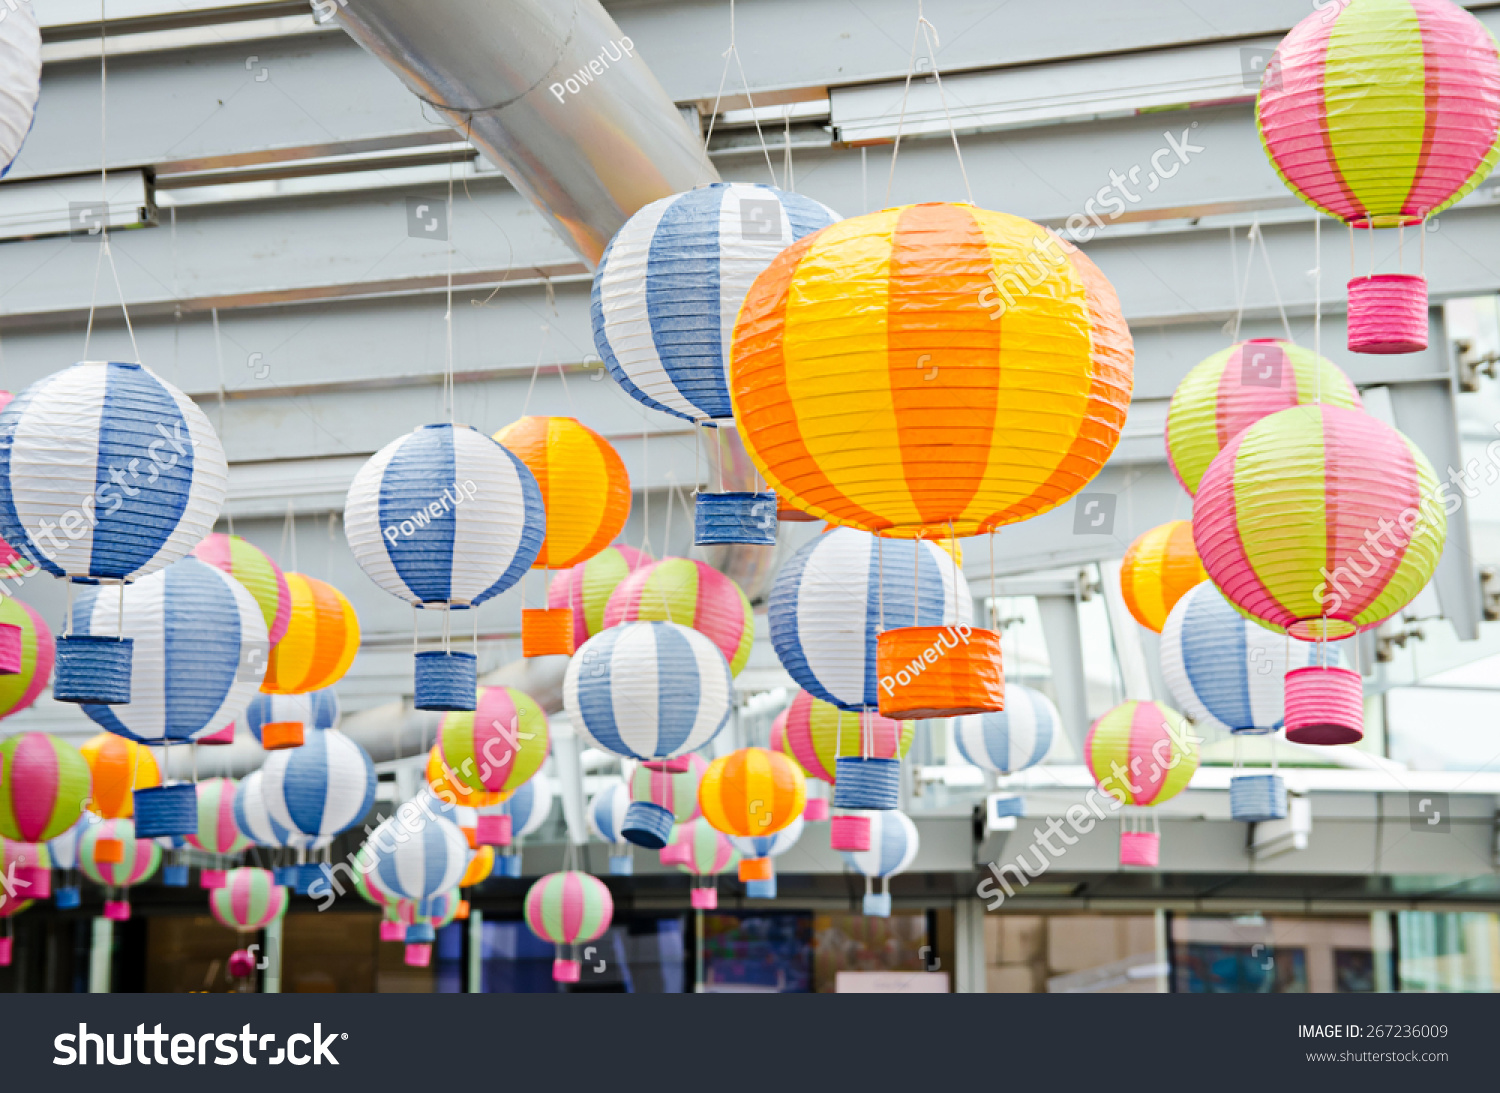 Hot Air Balloon Decoration On Ceiling Stock Image Download Now